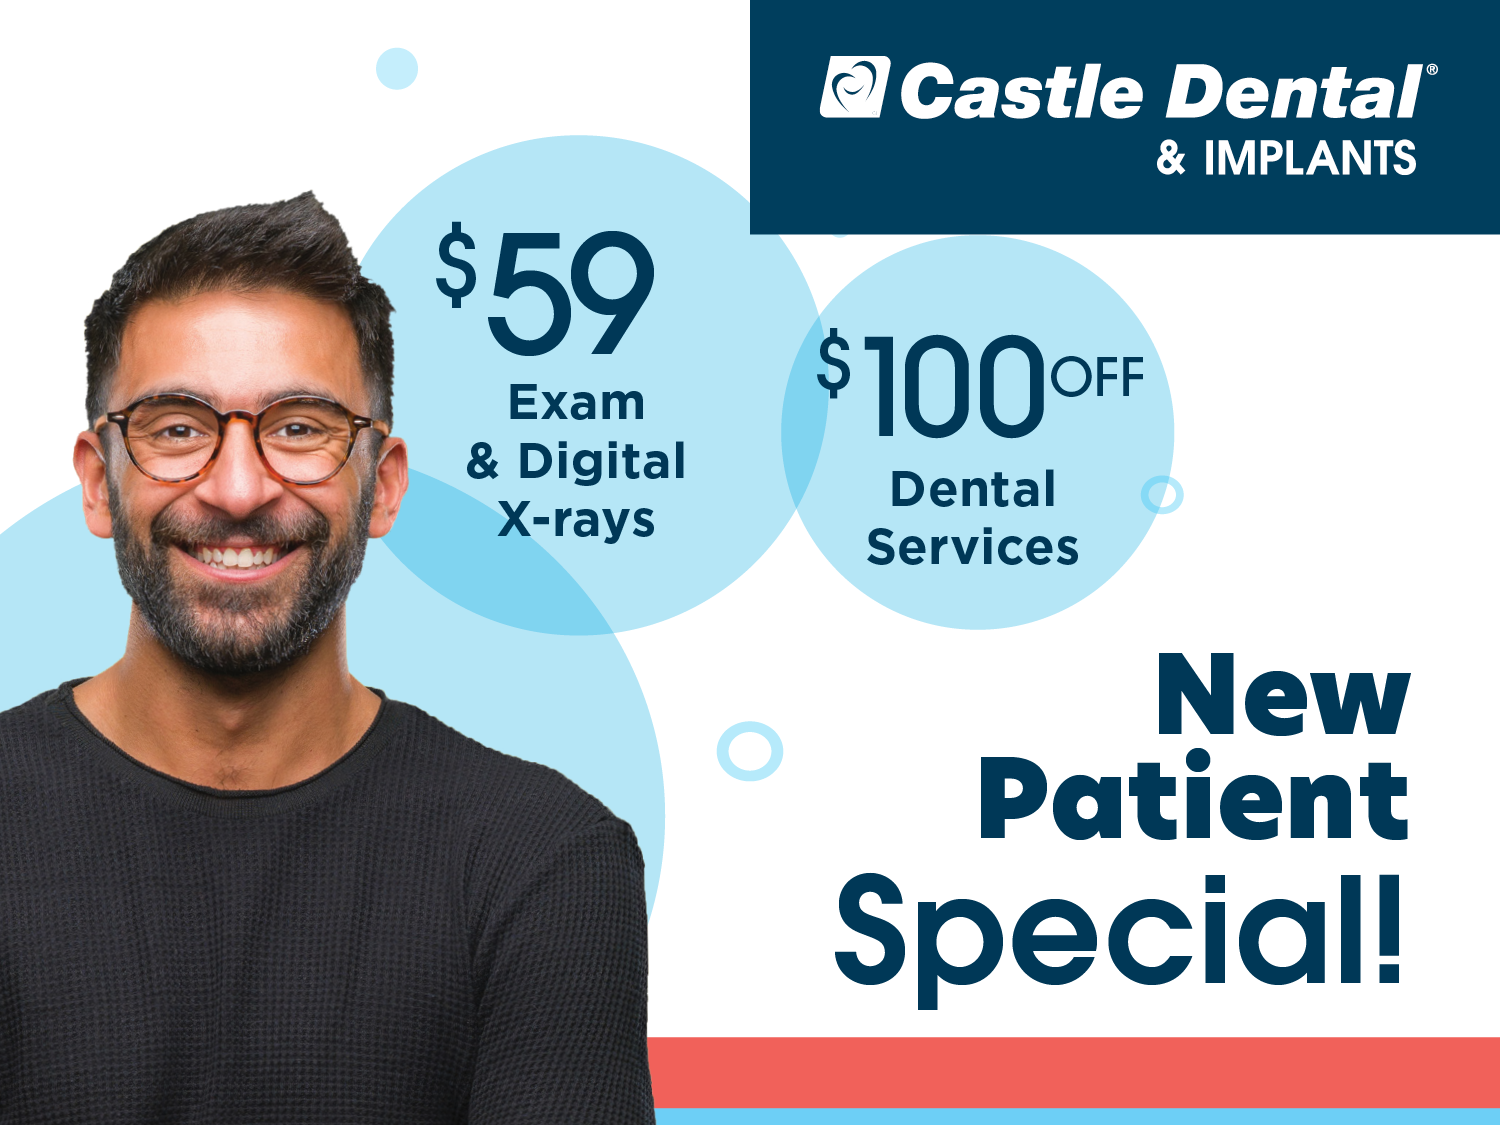 Check out our new patient offers! Contact Castle Dental & Implants for offer details. Restrictions apply.